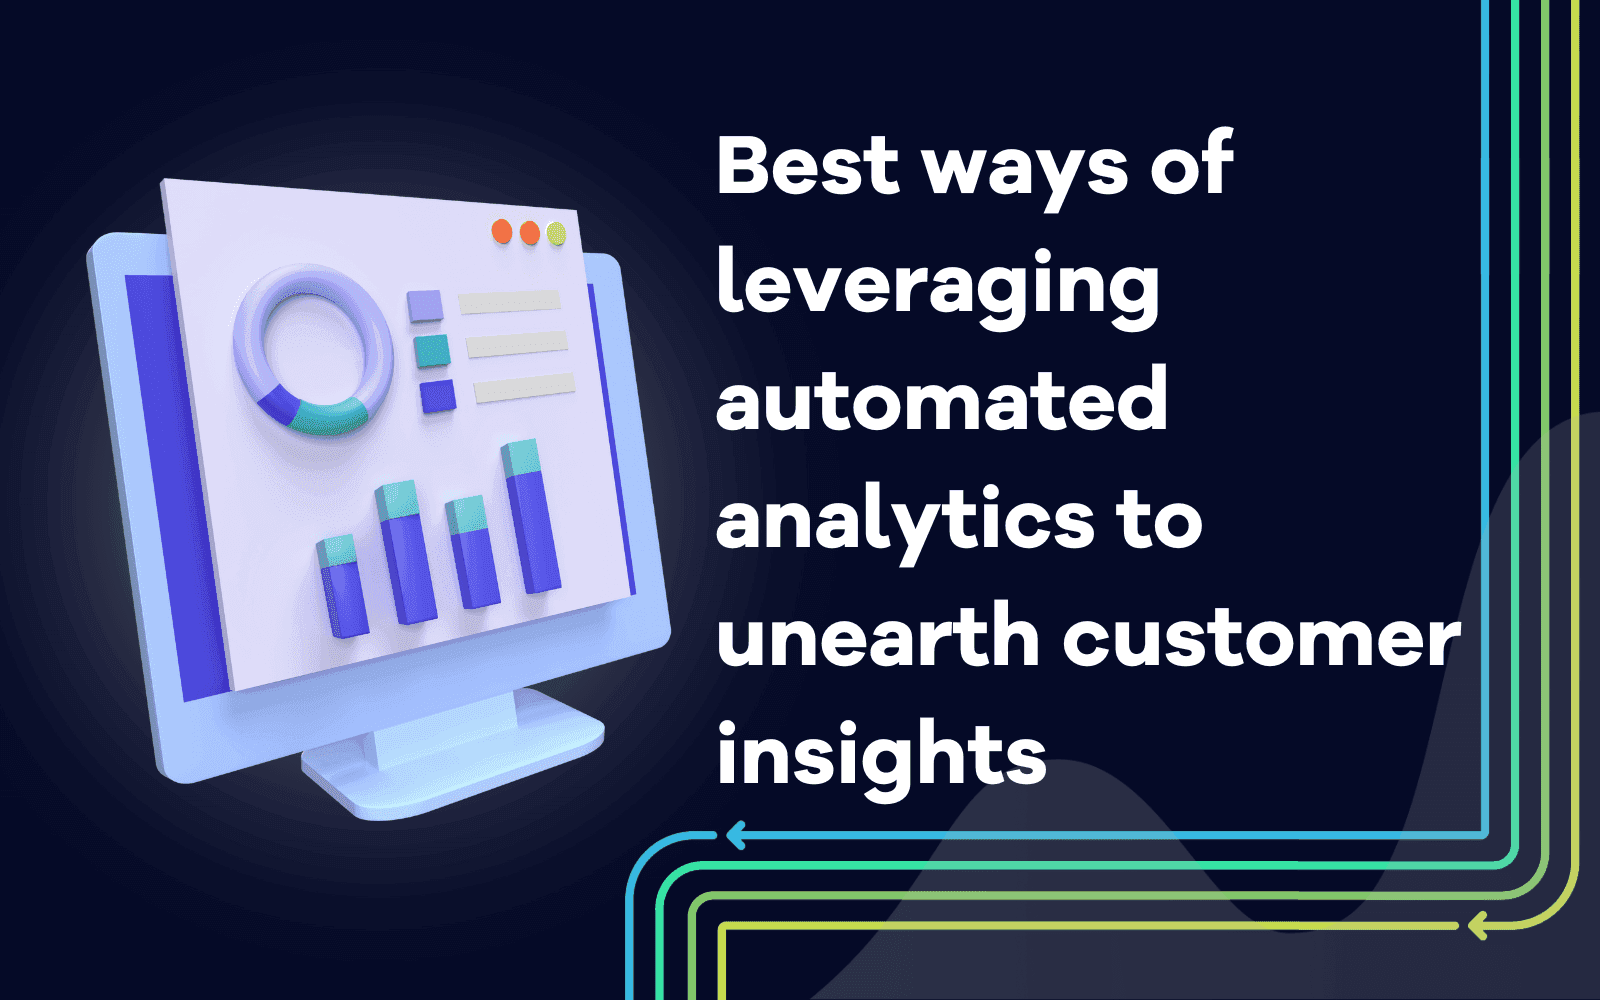 Best ways of leveraging automated analytics to unearth customer insights